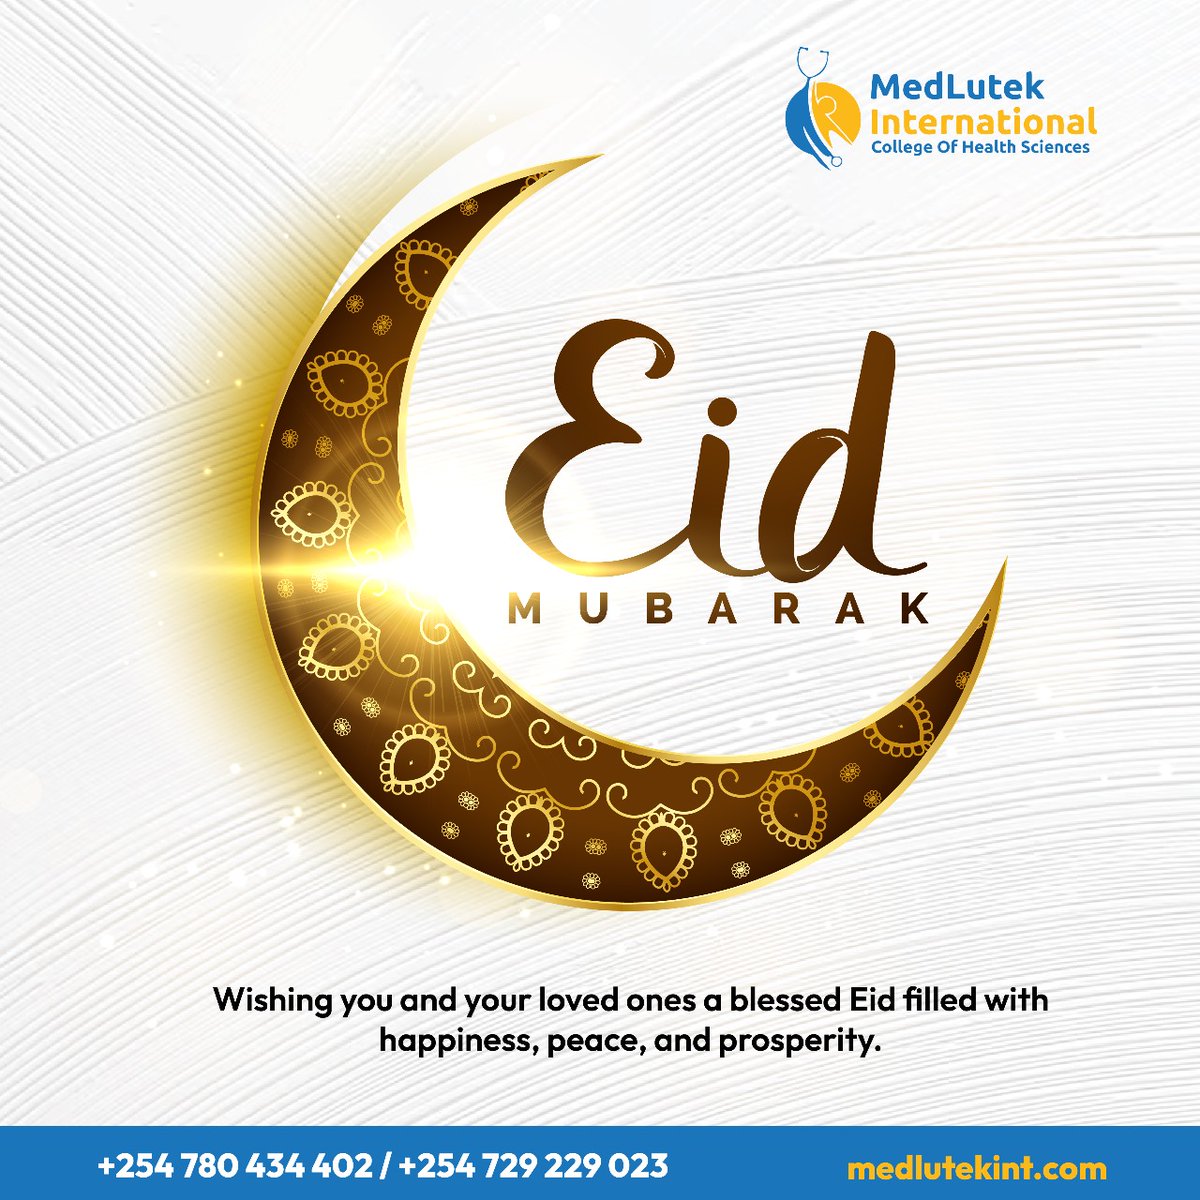 Eid Mubarak to our Muslim brothers and sisters! May this special day bring you joy, peace, and blessings. #EidMubarak #Eidmubarak2024